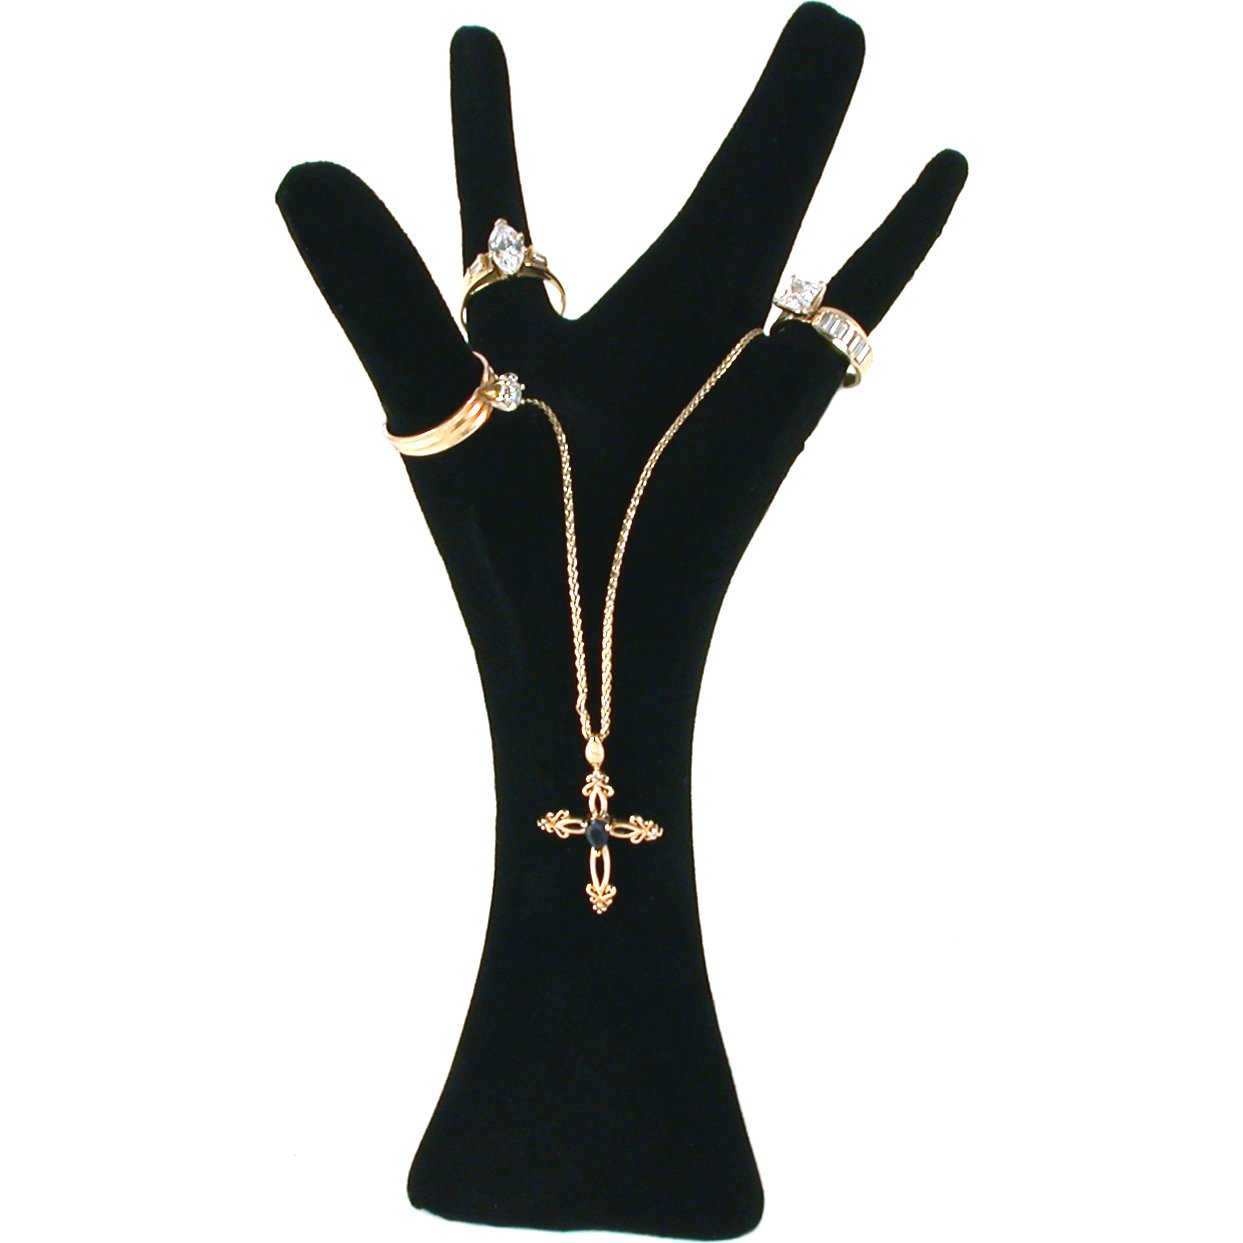 Black Open Palm Ring Hand Display Jewelry Stand 8"